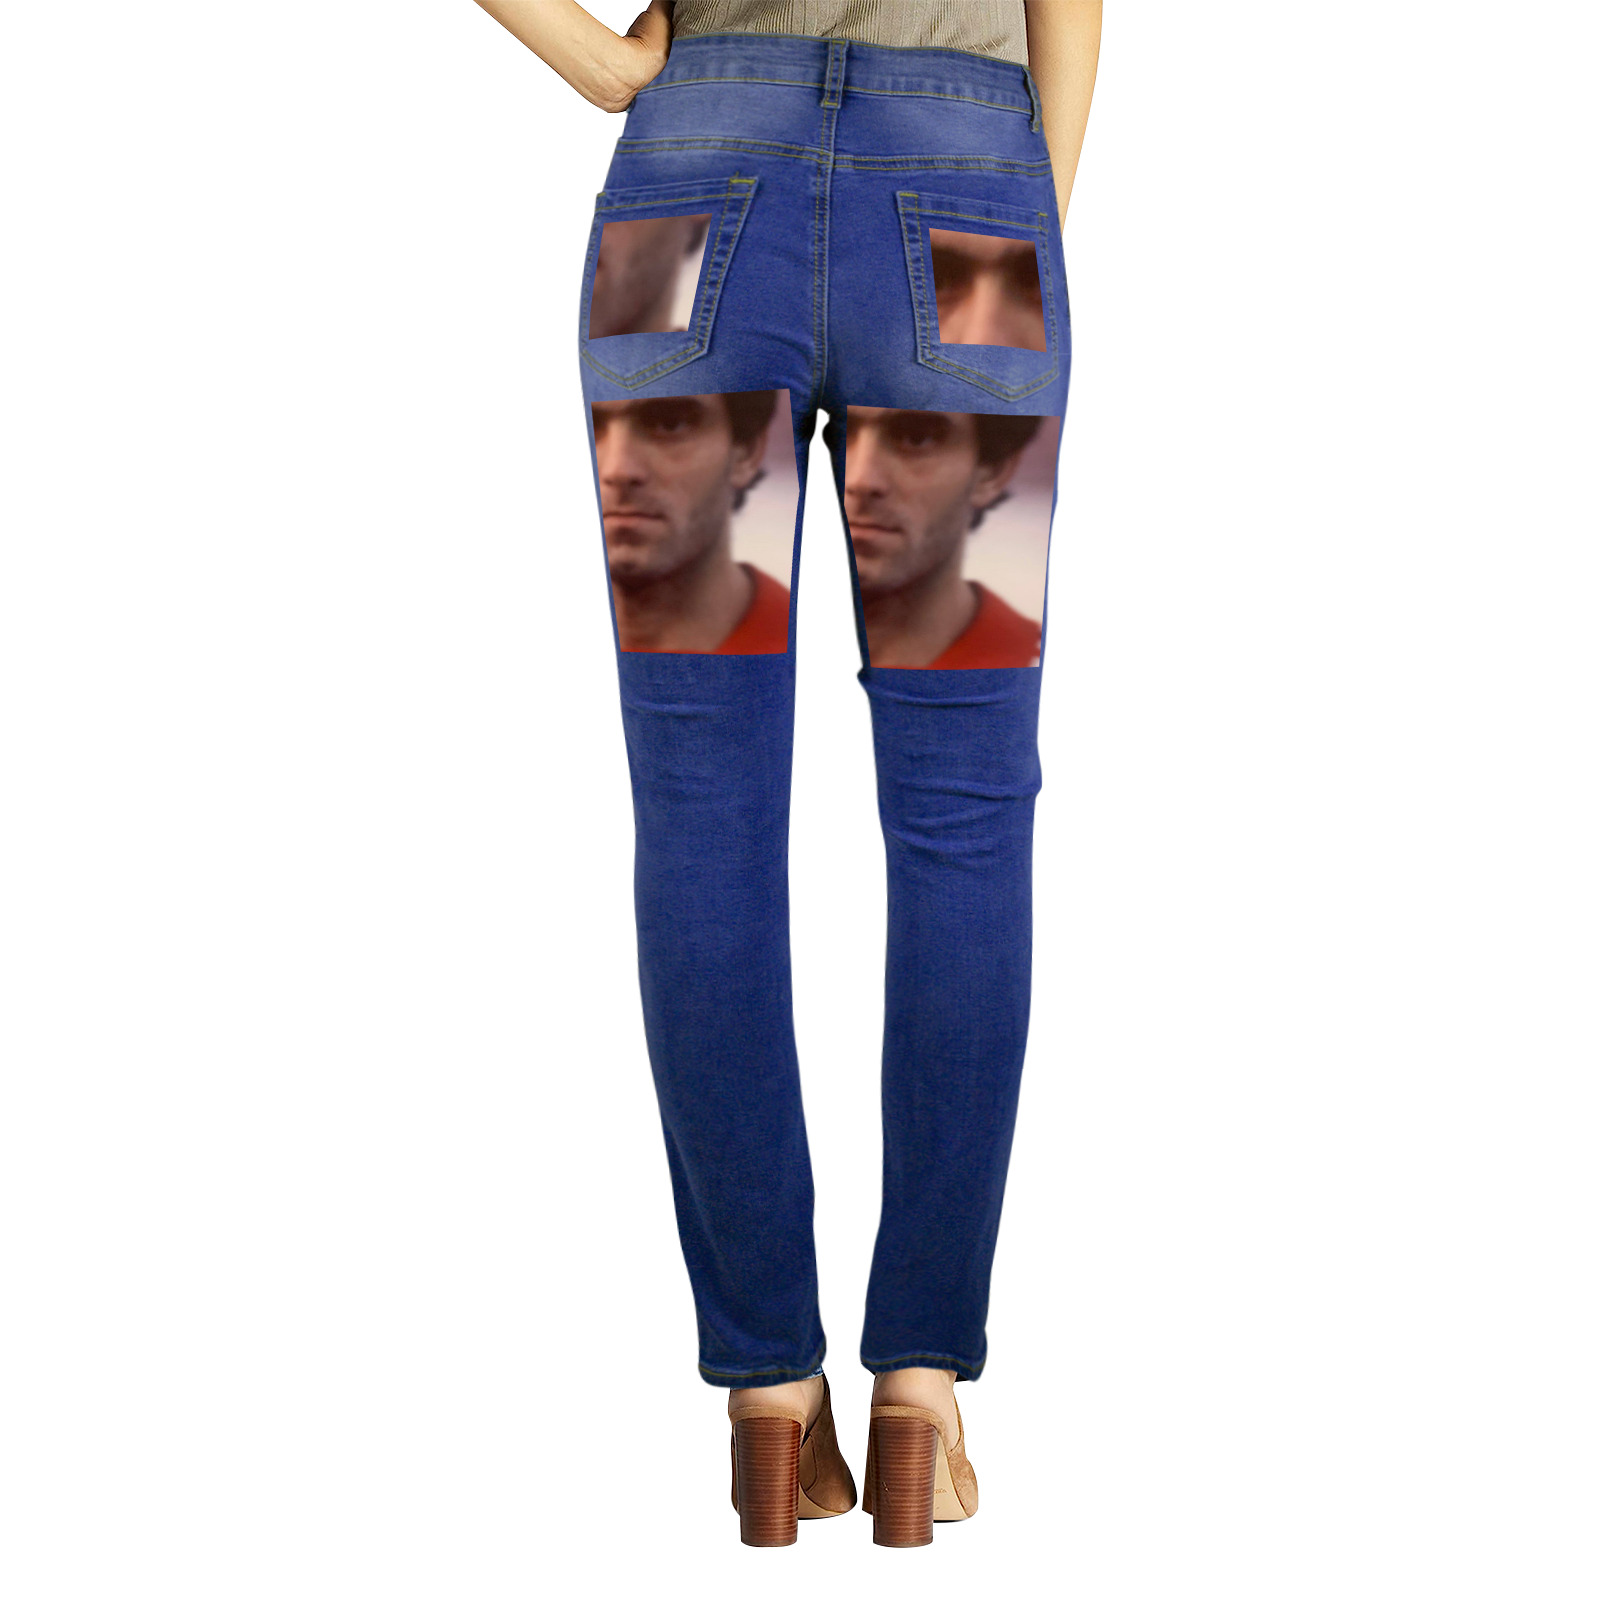 mesny. Women's Jeans (Front&Back Printing)